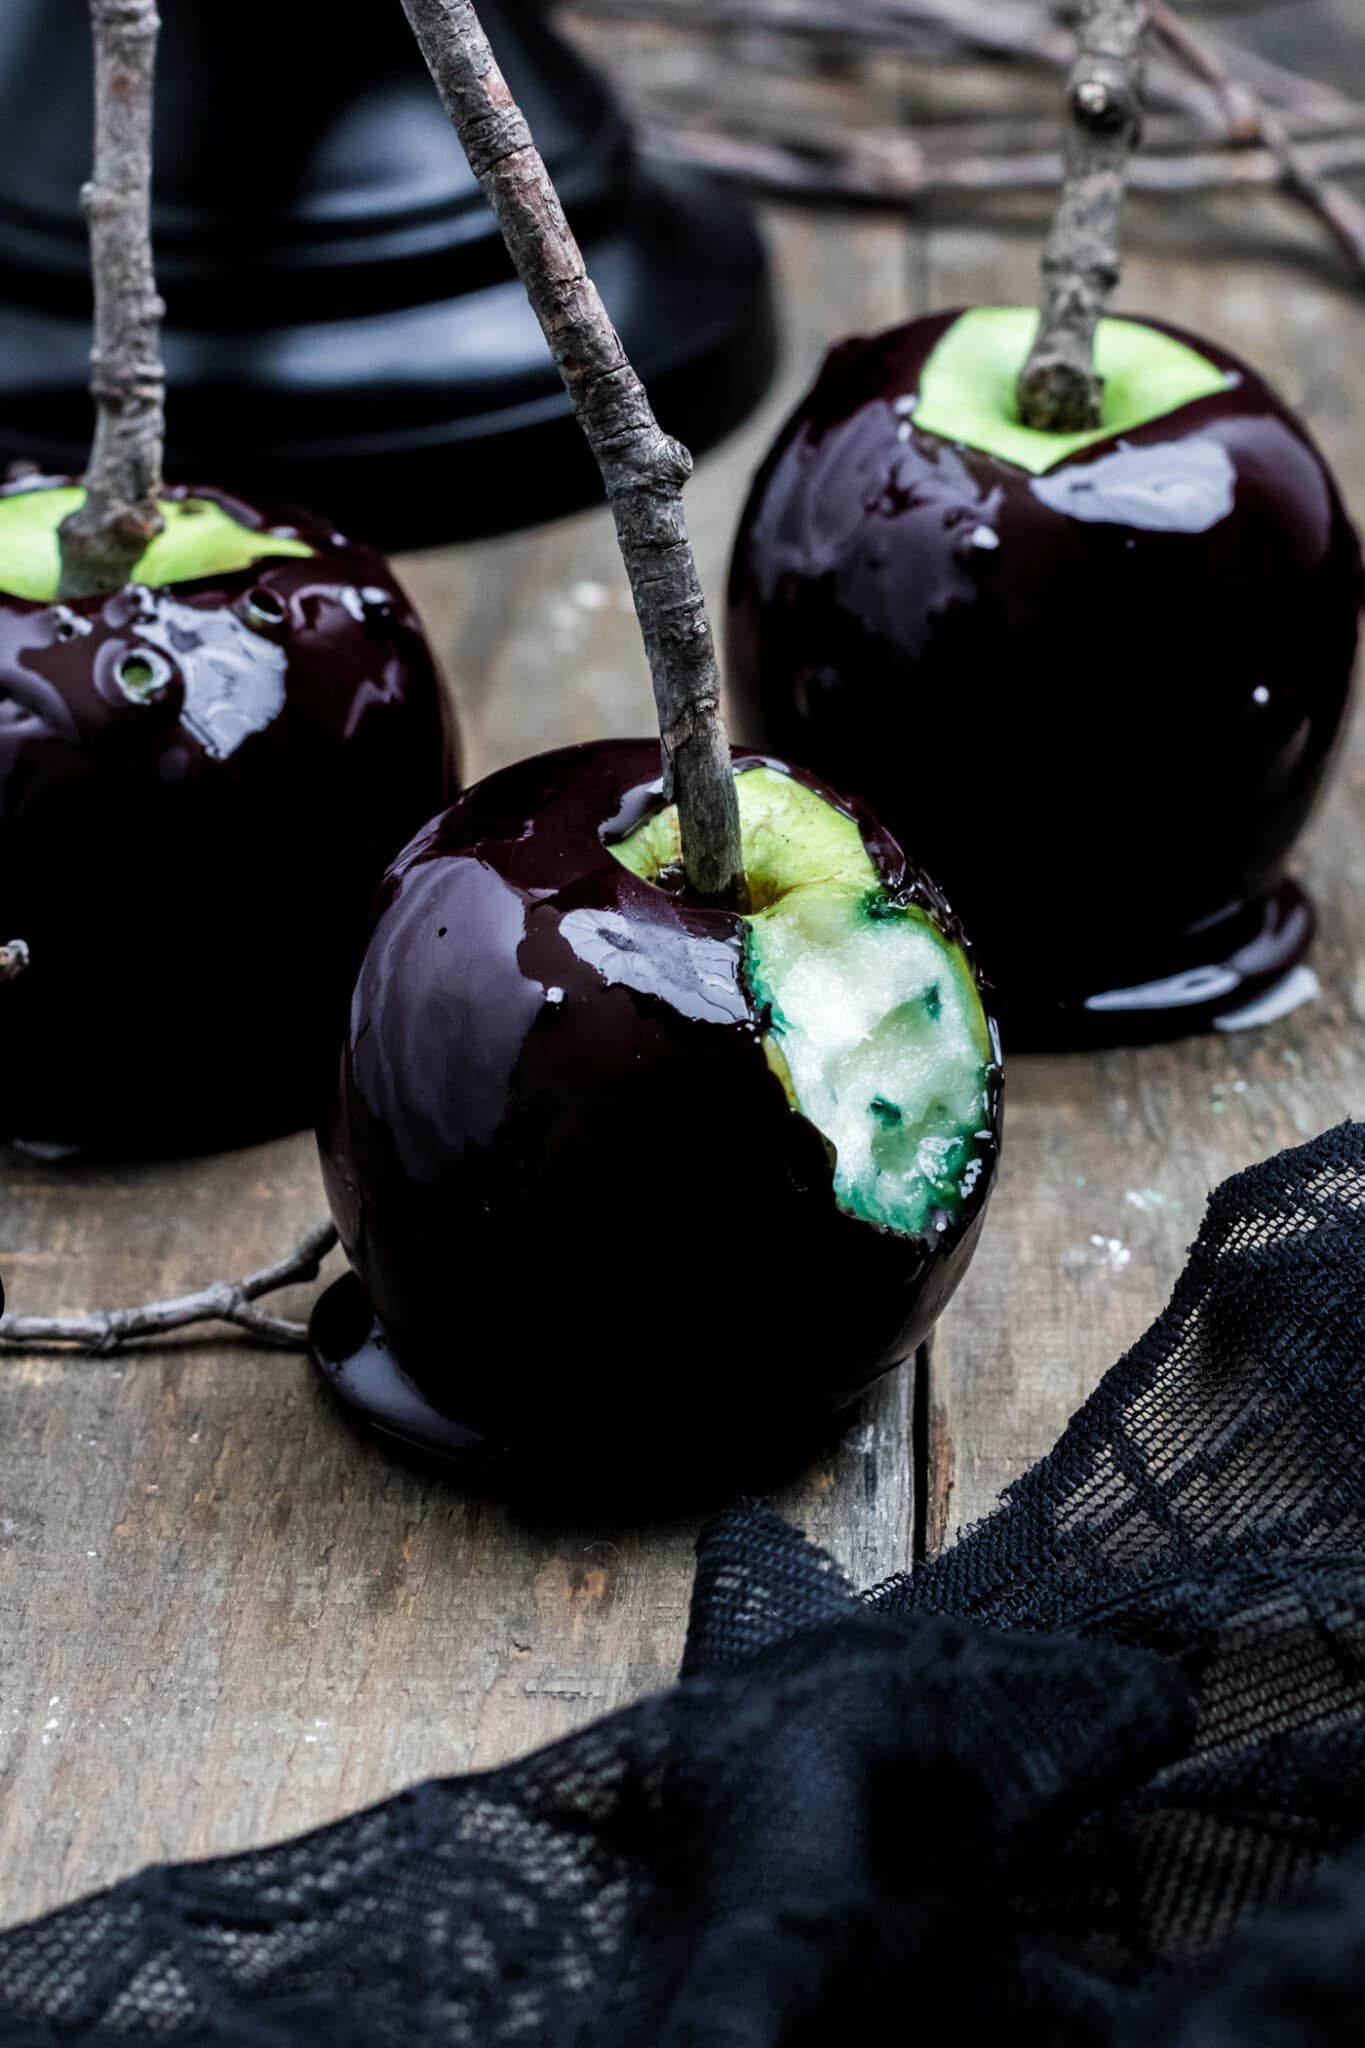 Very dark candy coating on green apples with natural wood stick on wooden background.